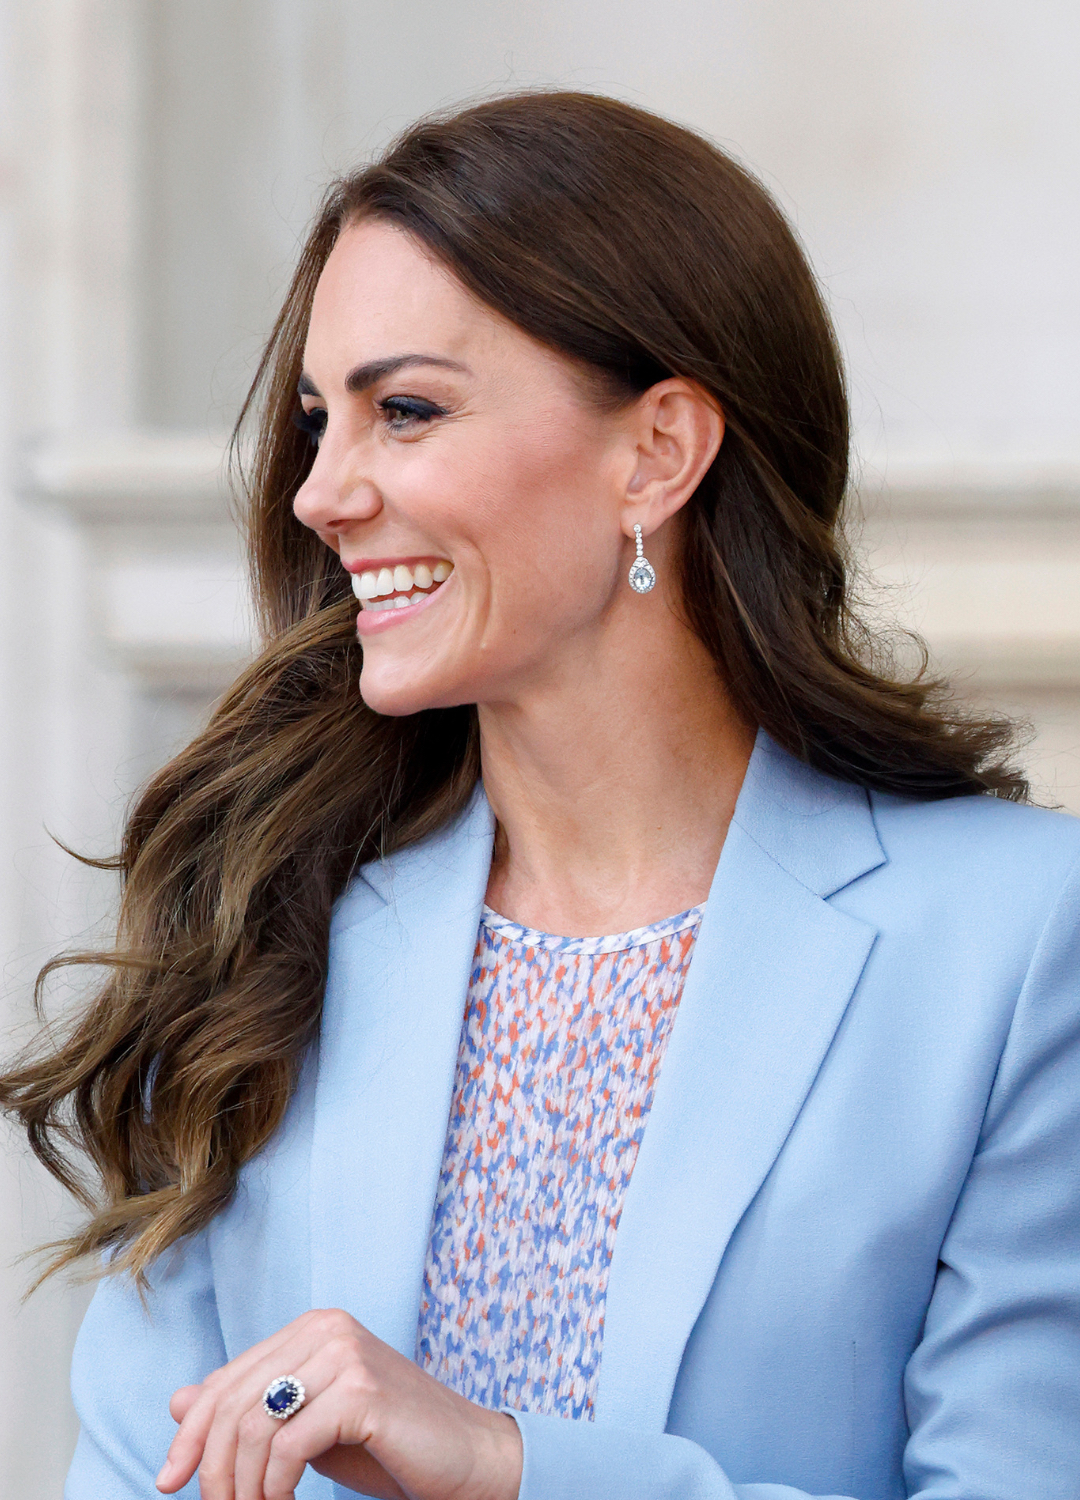 Catherine, Duchess of Cambridge departs after visiting the Fitzwilliam Museum during an official visit to Cambridgeshire on June 23, 2022 in Cambridge, England